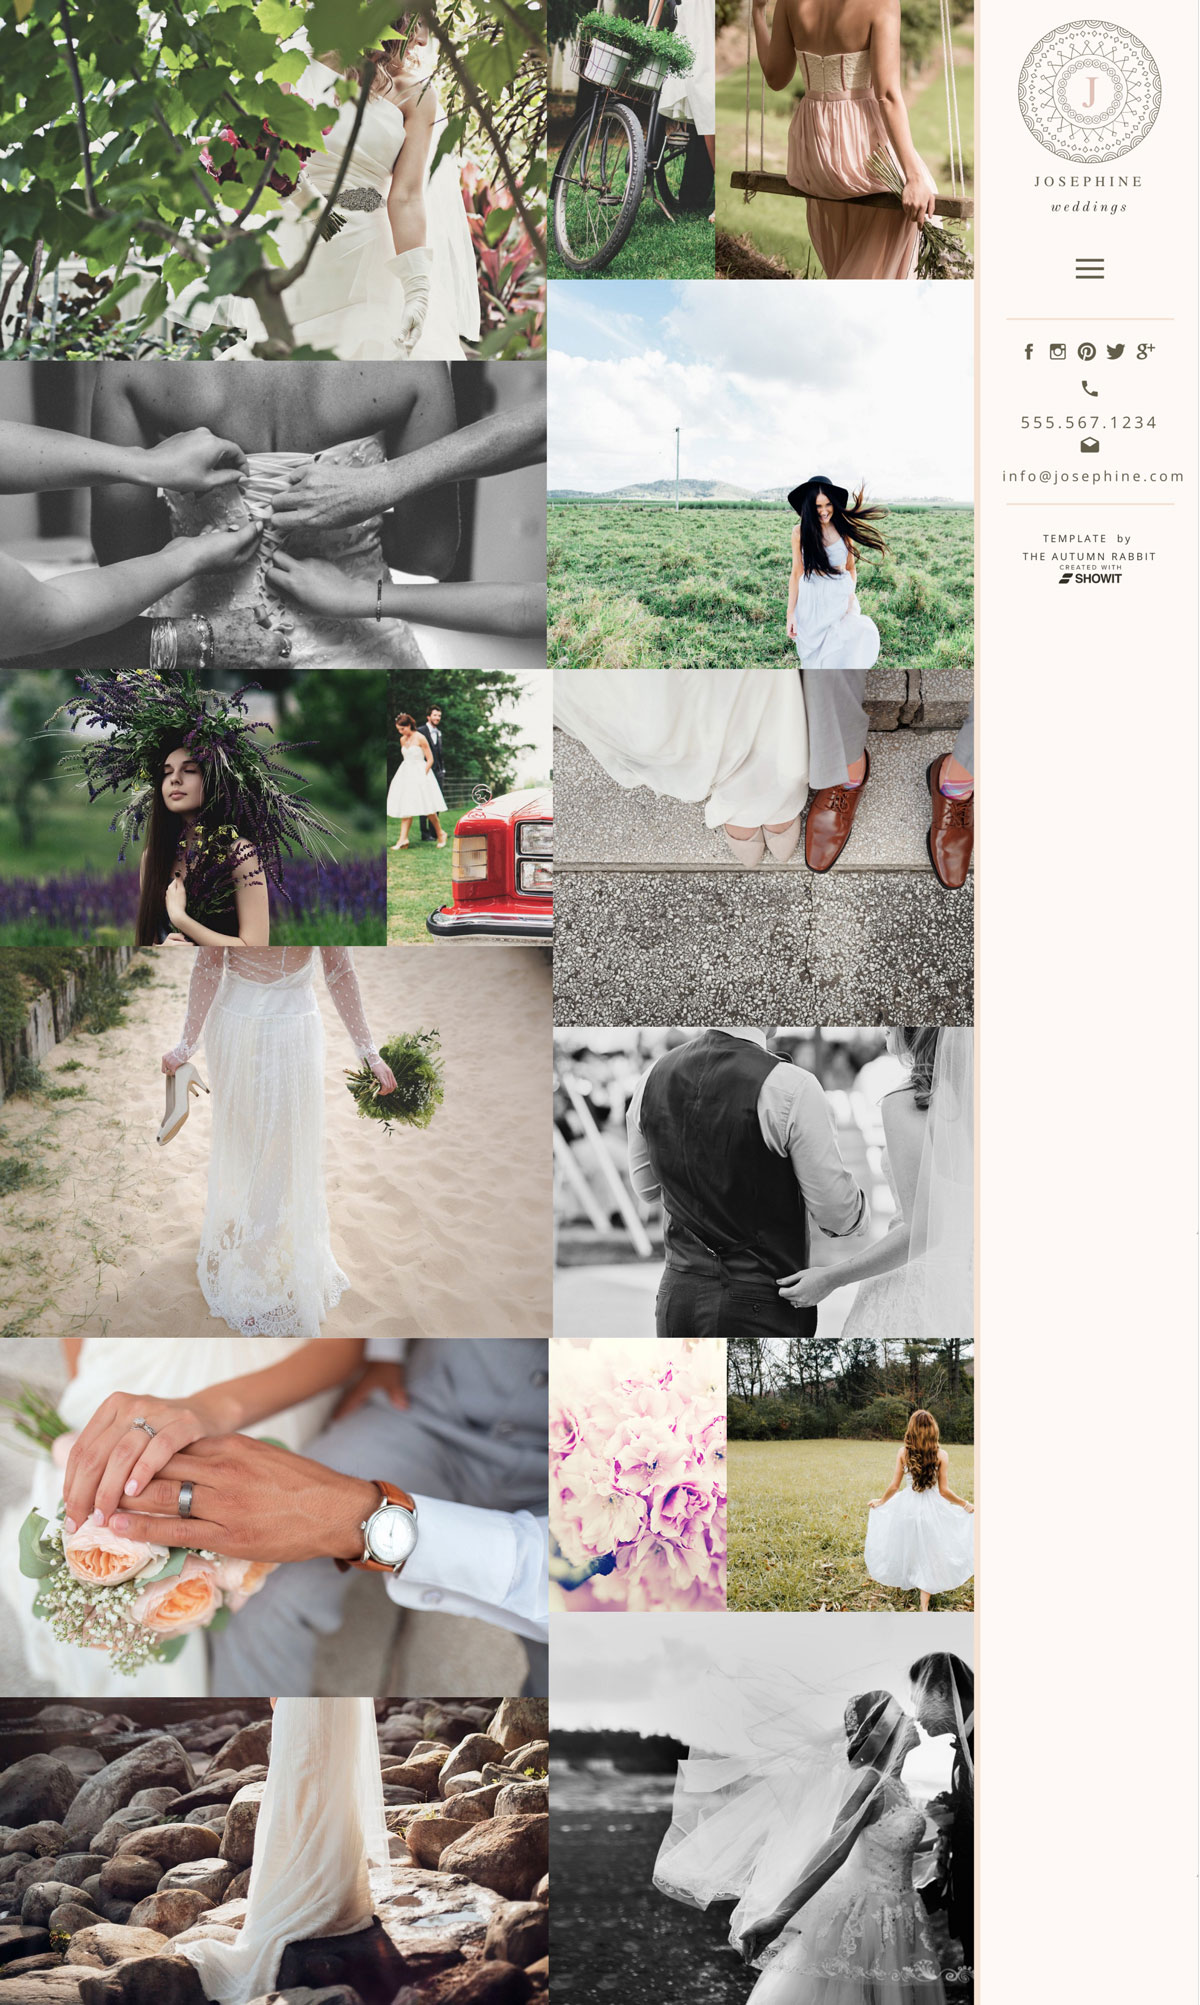 beautiful, creative website for photographers, Showit